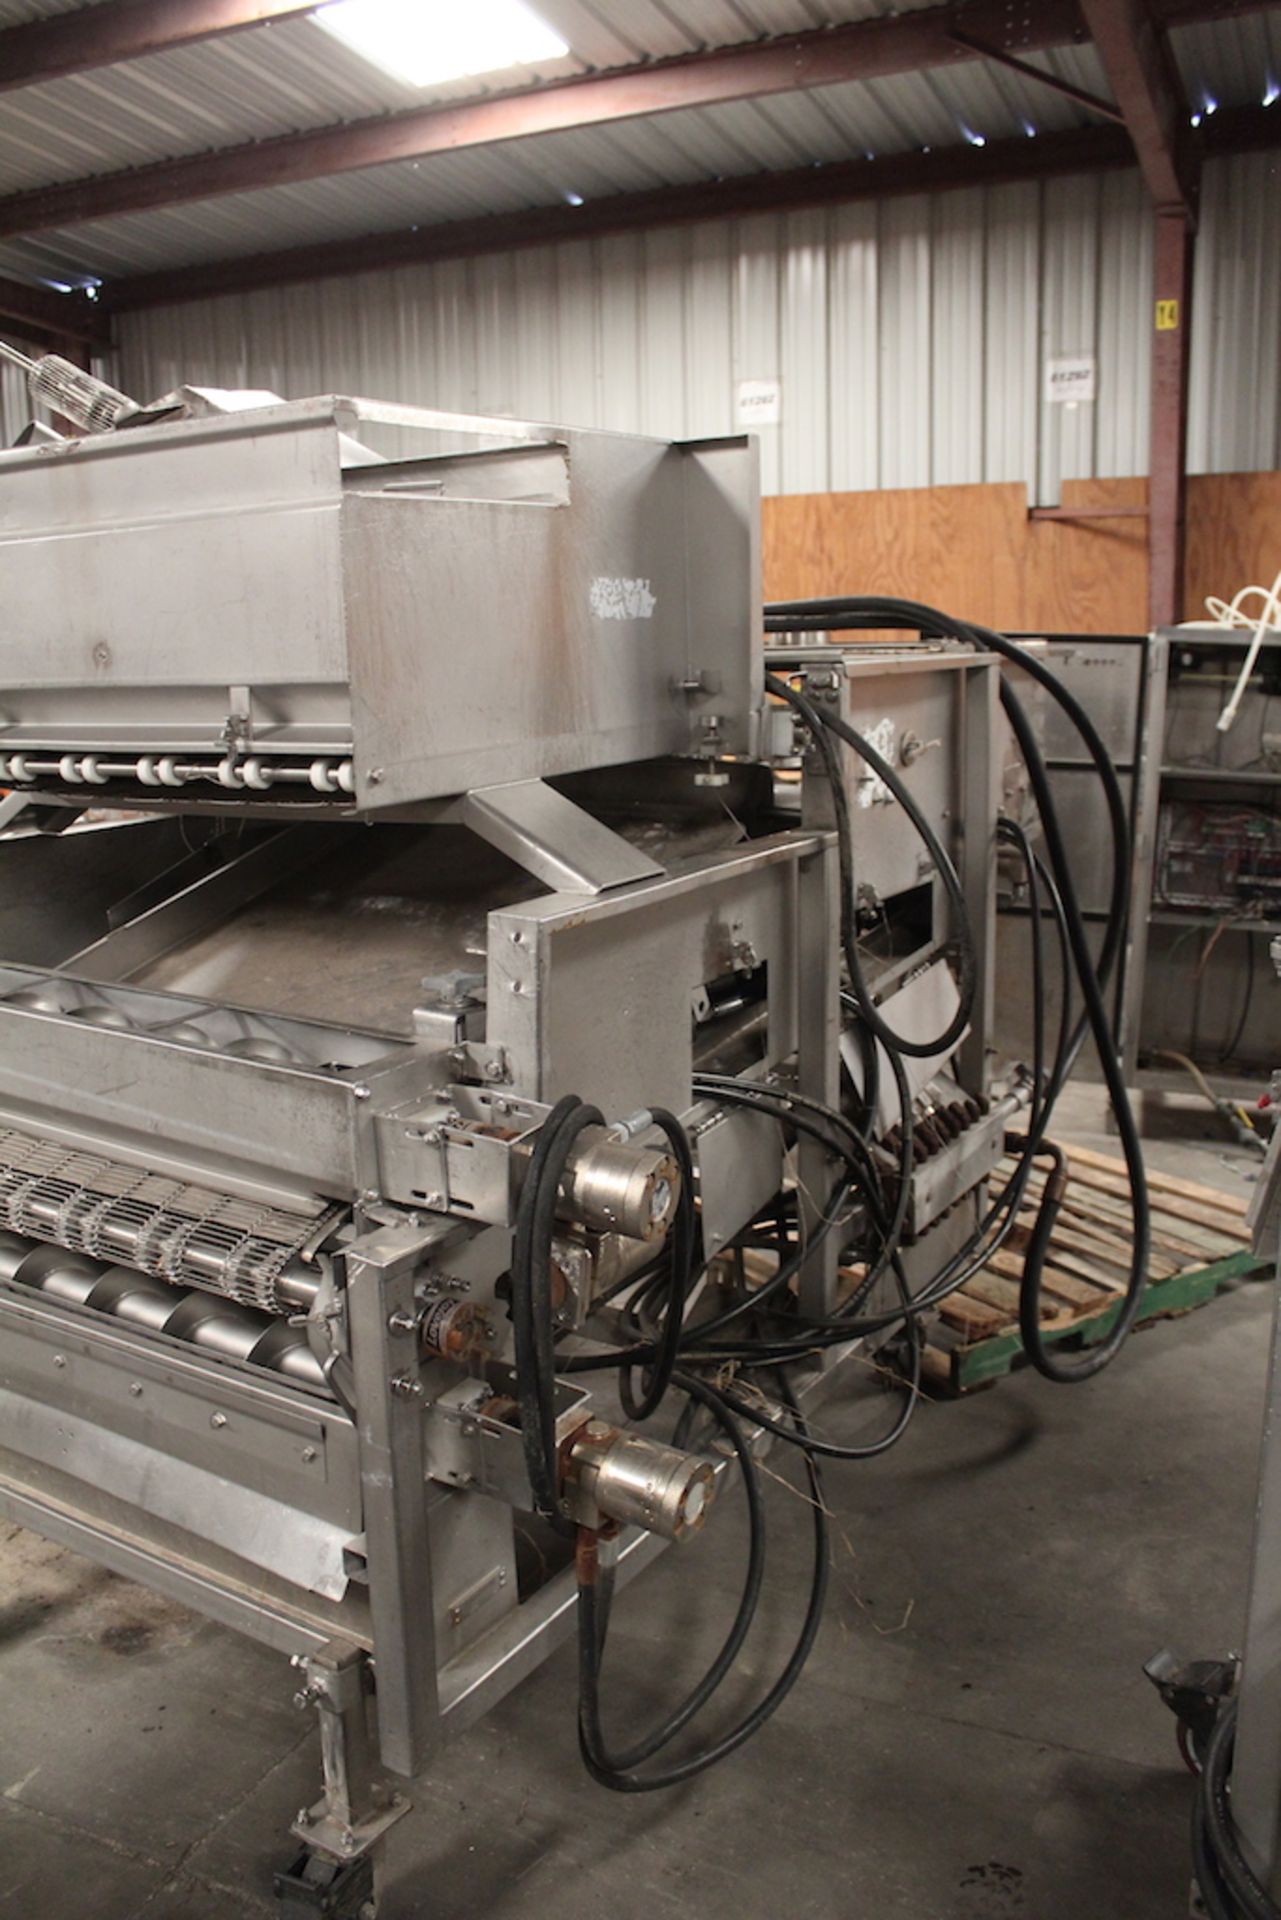 Stein 34'' XL Breader, Model# XL-34-FH, Serial# 548, Located in: Siloam Springs, AR - Image 4 of 6